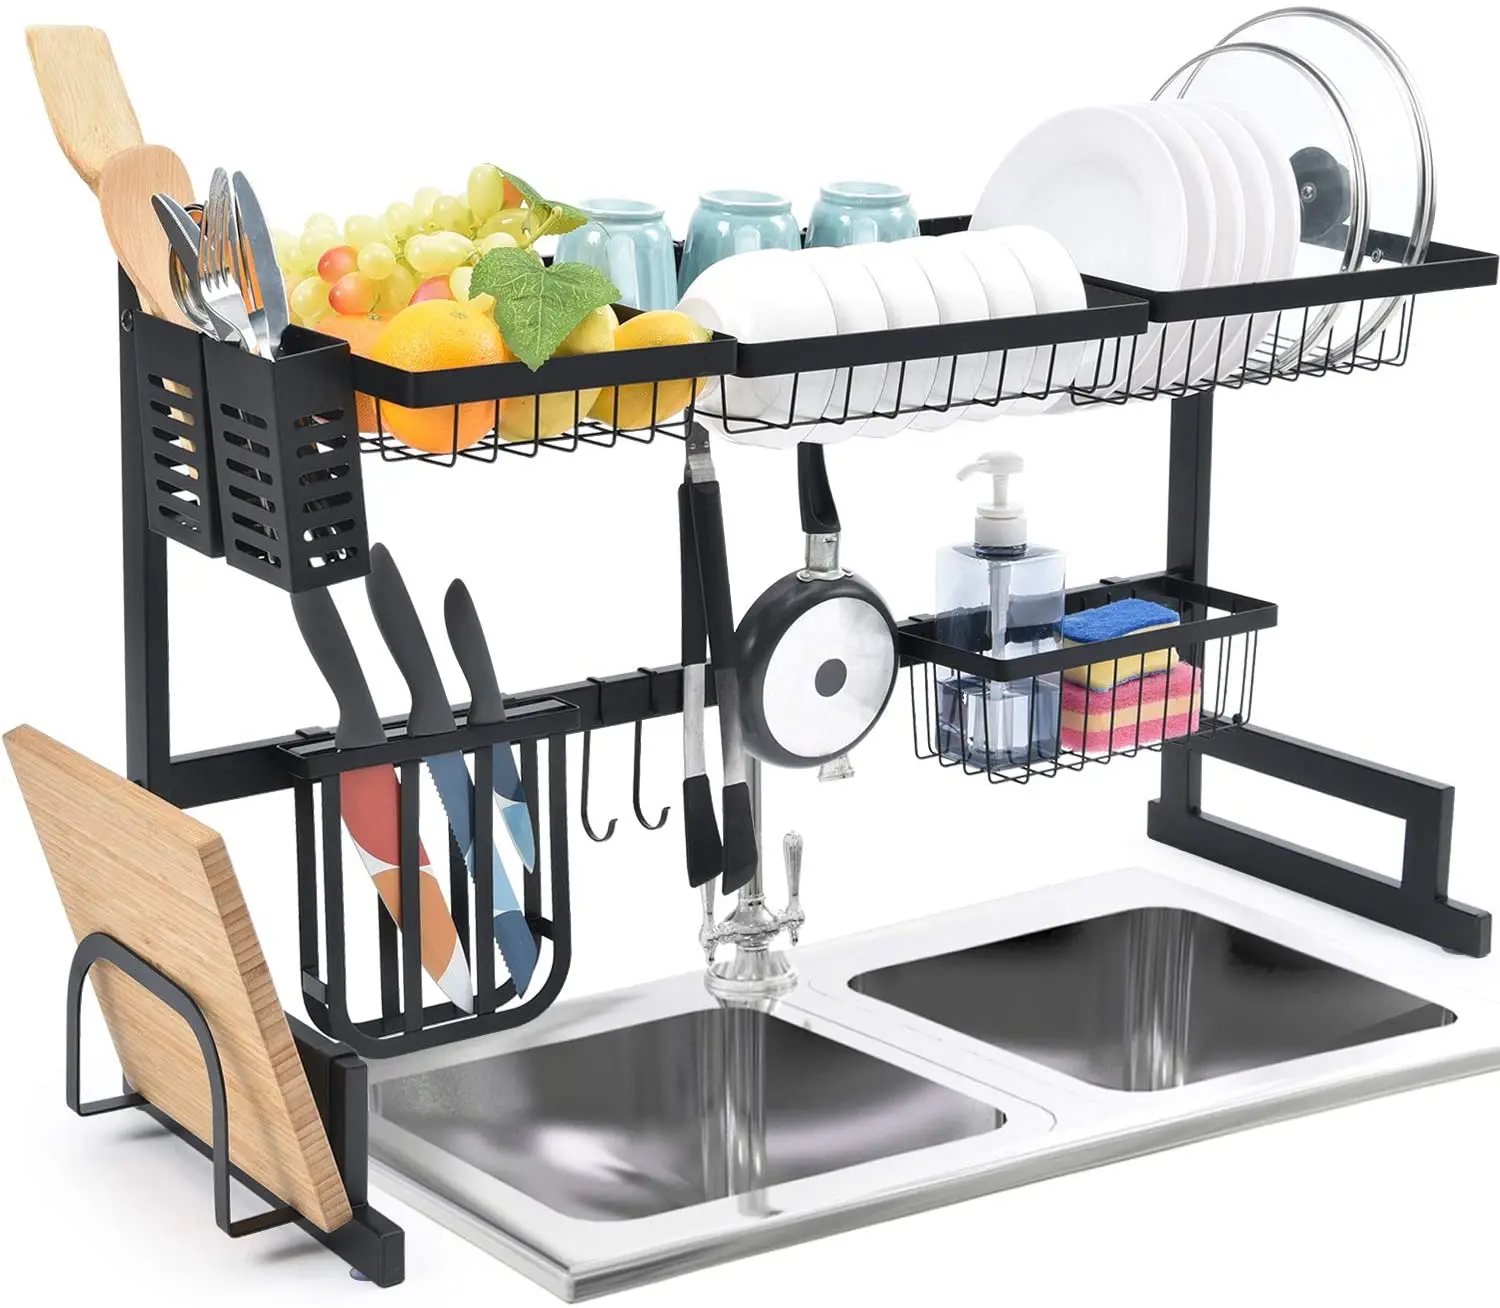 

85cm Stainless Steel Black, Dish Washing Kitchen Storage Organizer Over The Sink Dish Drying Rack/, Customized color